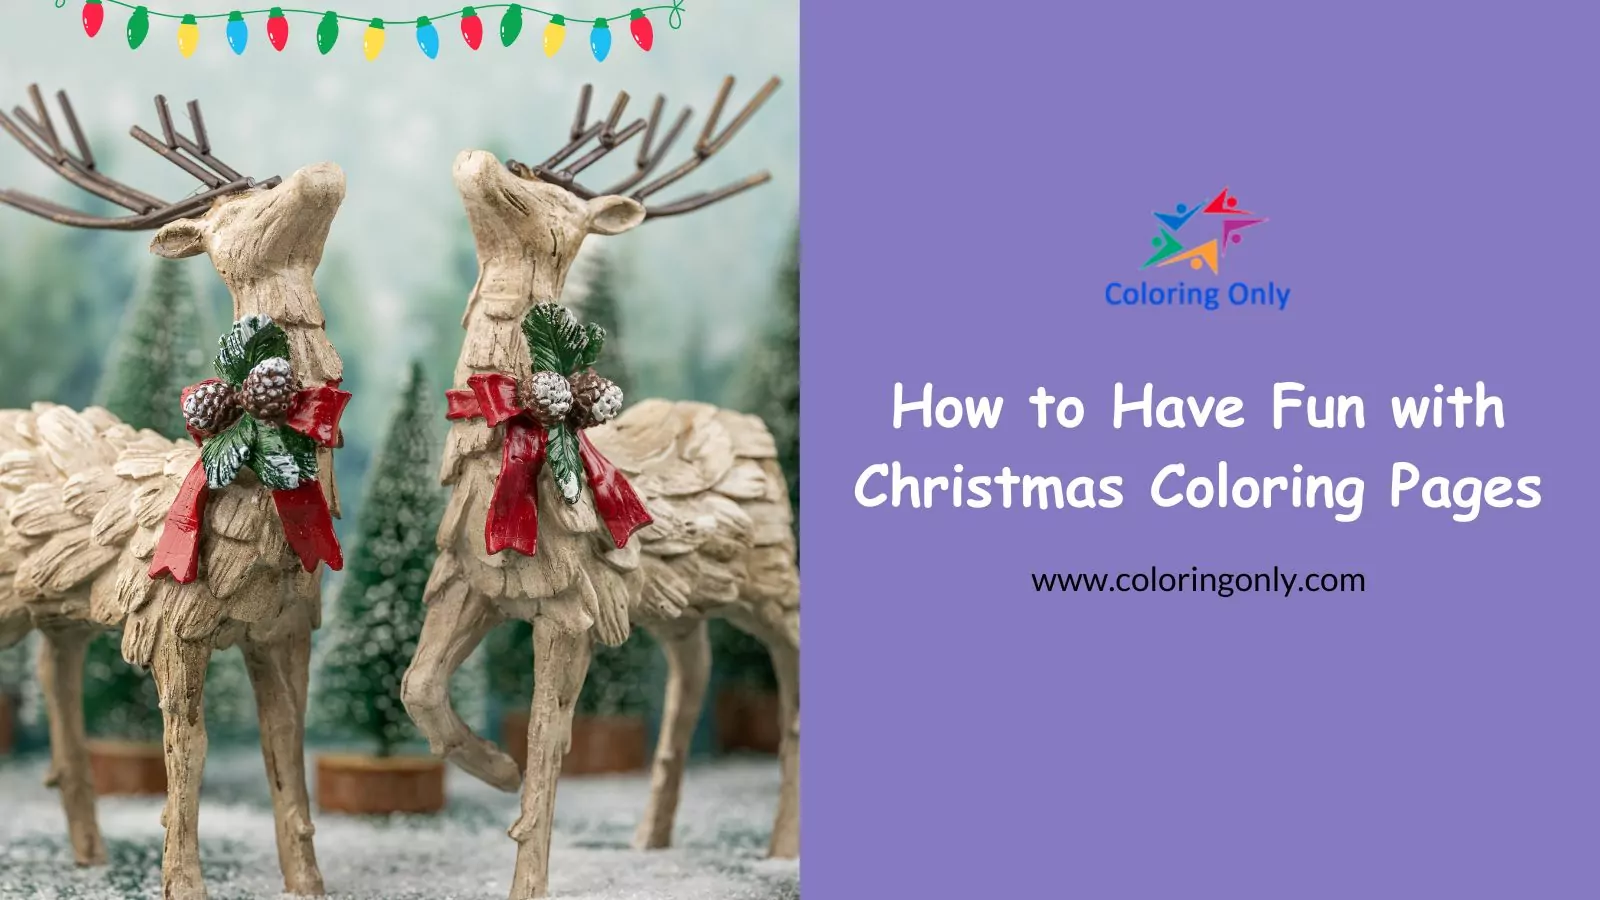 How to Have Fun with Christmas Coloring Pages